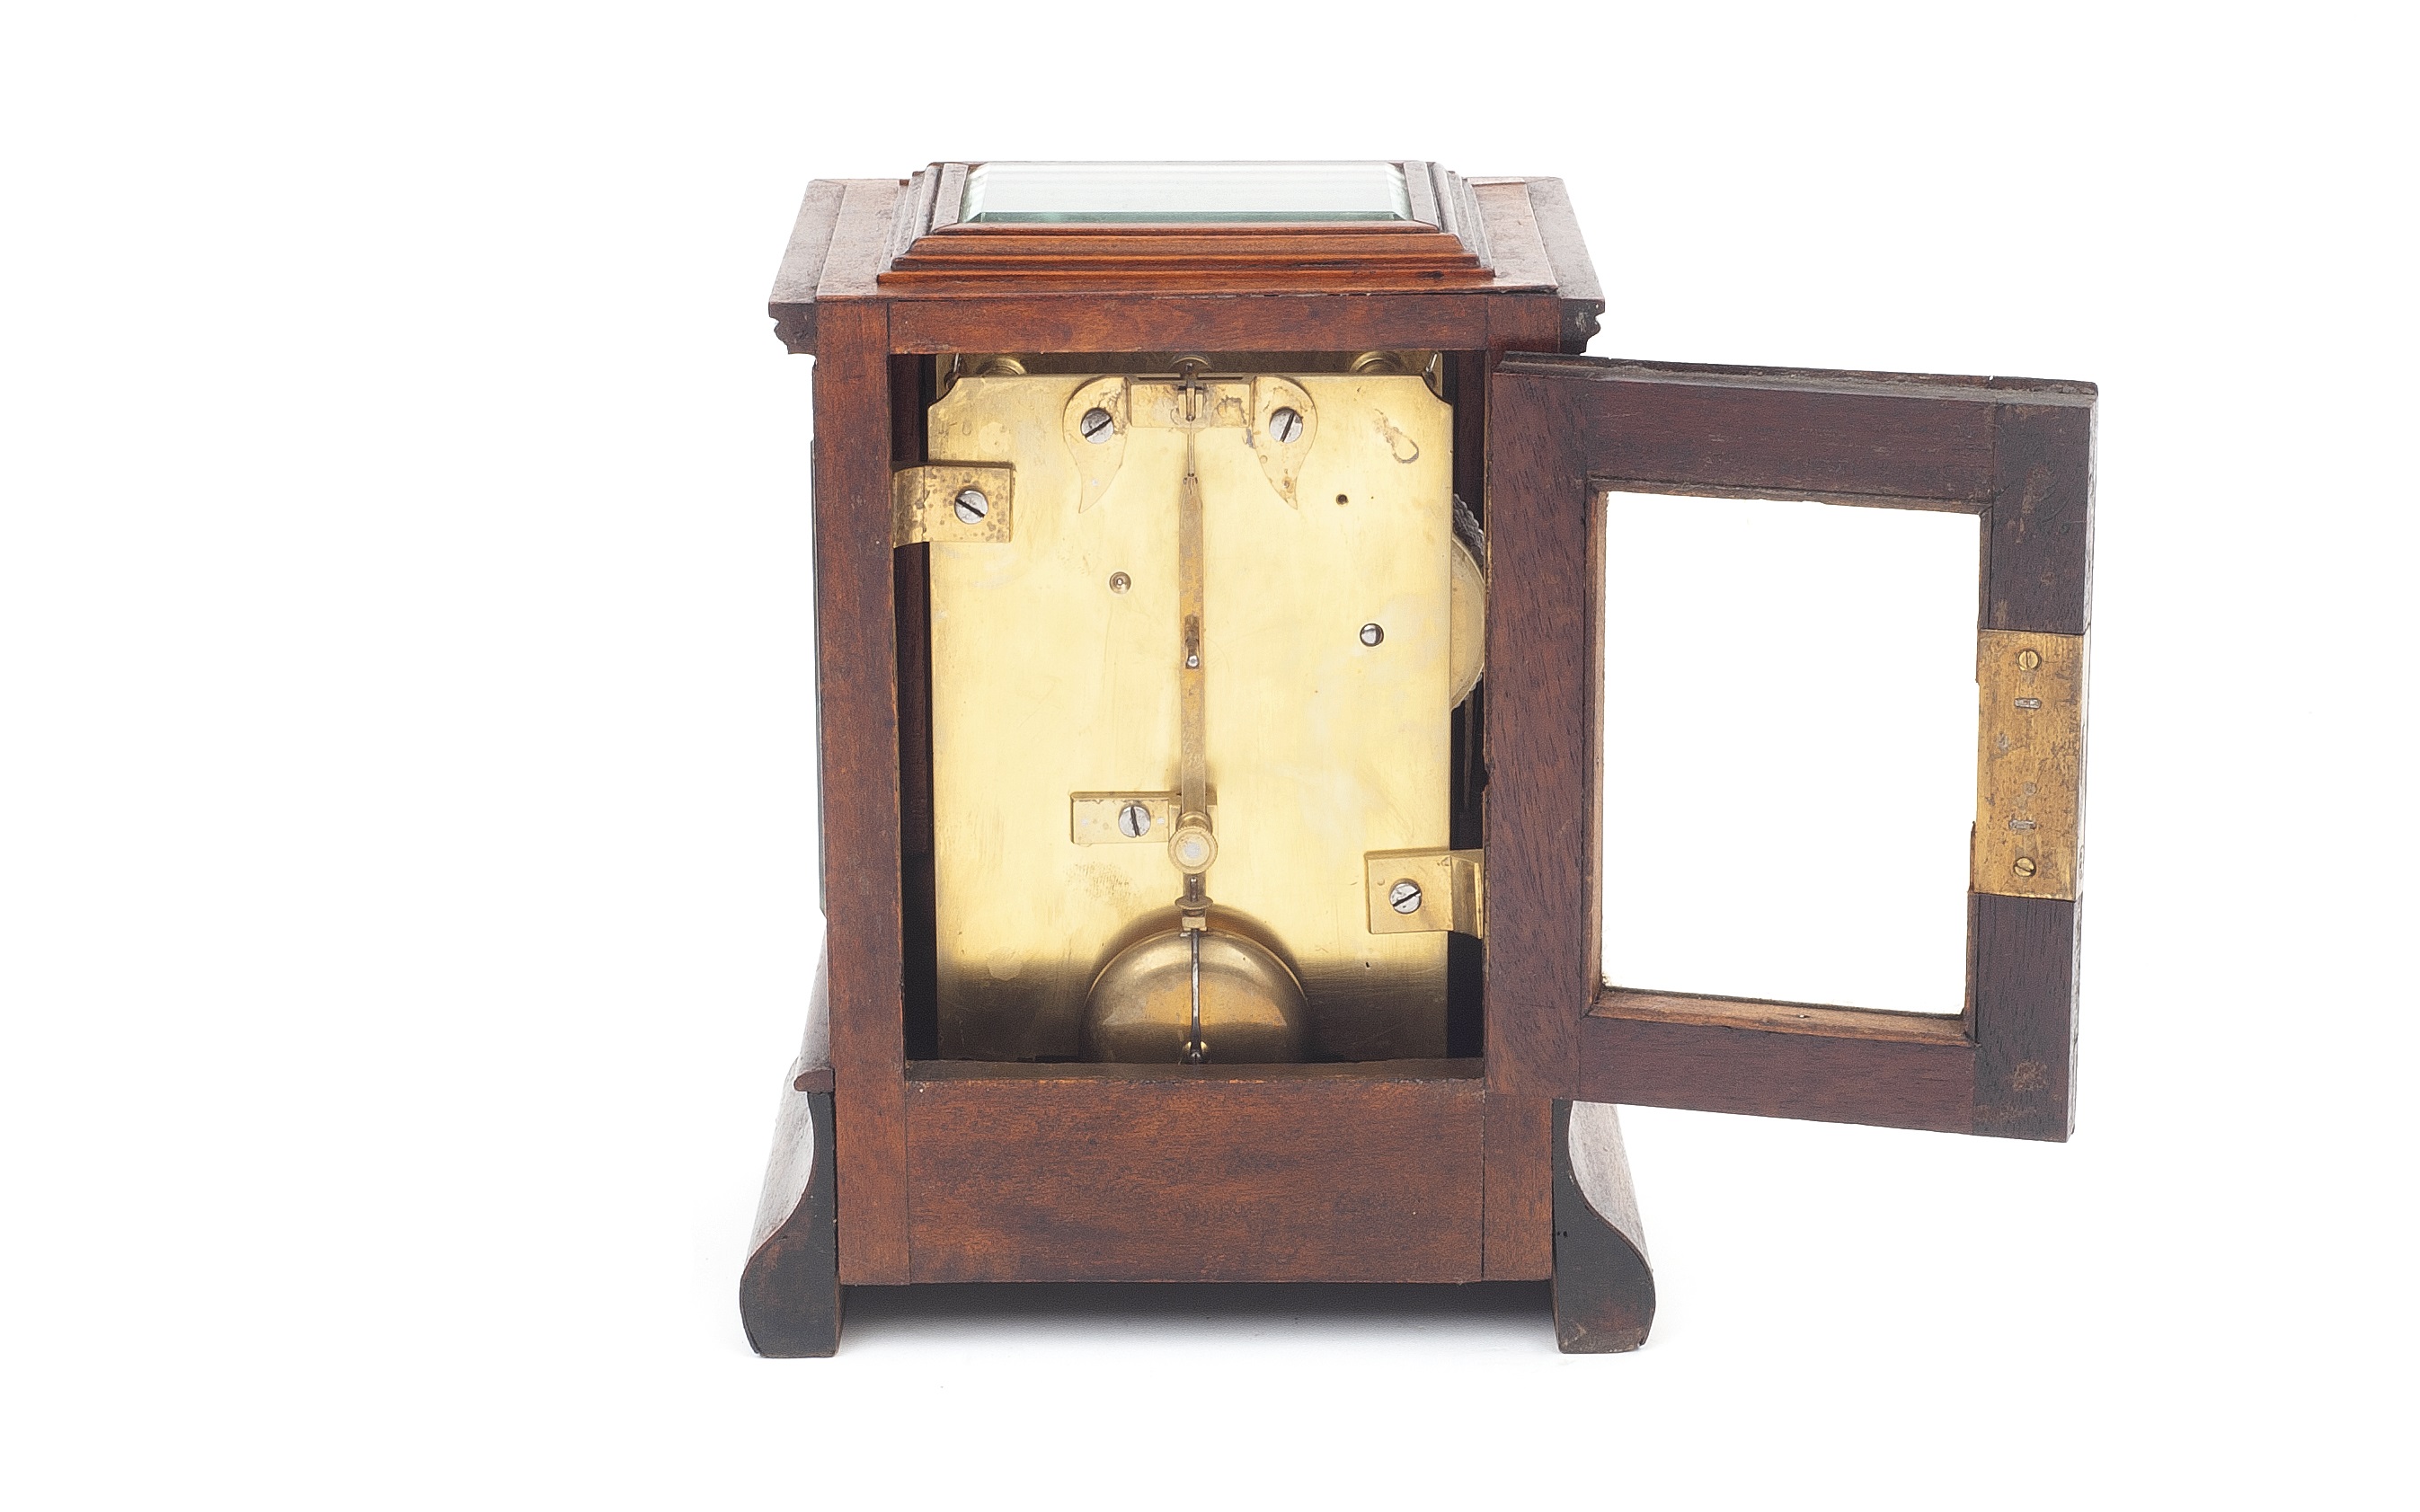 A MID 19TH CENTURY ENGLISH FOUR GLASS LIBRARY CLOCK SIGNED 'BENNETT, 65 CHEAPSIDE' - Image 3 of 3